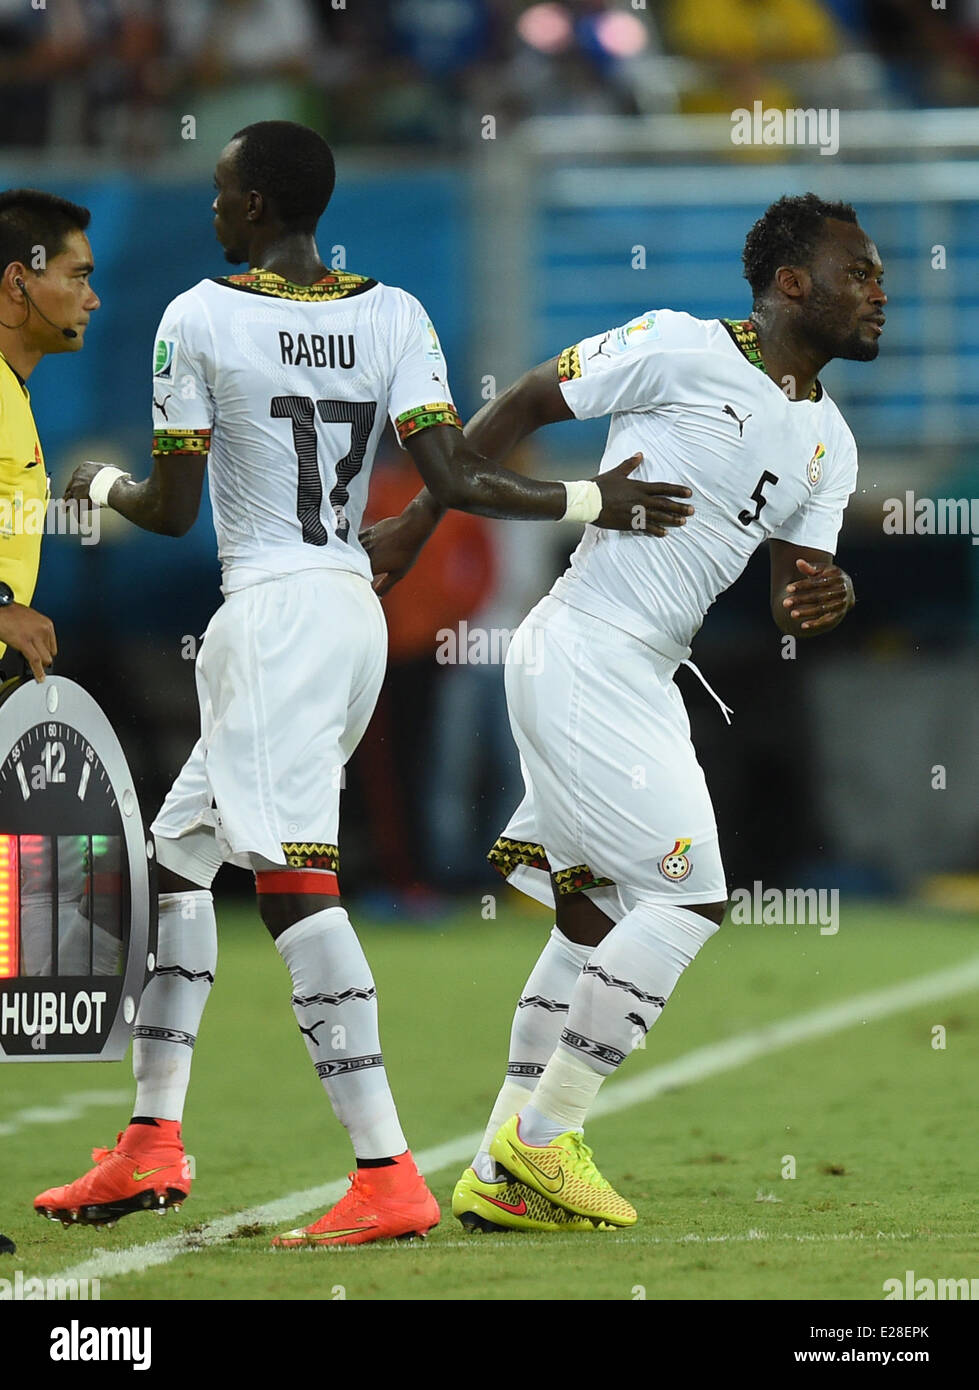 Natal, Brazil. 16th June, 2014. Mohammed Rabiu (L) of Ghana is substituted by Michael Essien during the FIFA World Cup 2014 group G preliminary round match between Ghana and the USA at the Estadio Arena das Dunas Stadium in Natal, Brazil, 16 June 2014. Credit:  dpa picture alliance/Alamy Live News Stock Photo